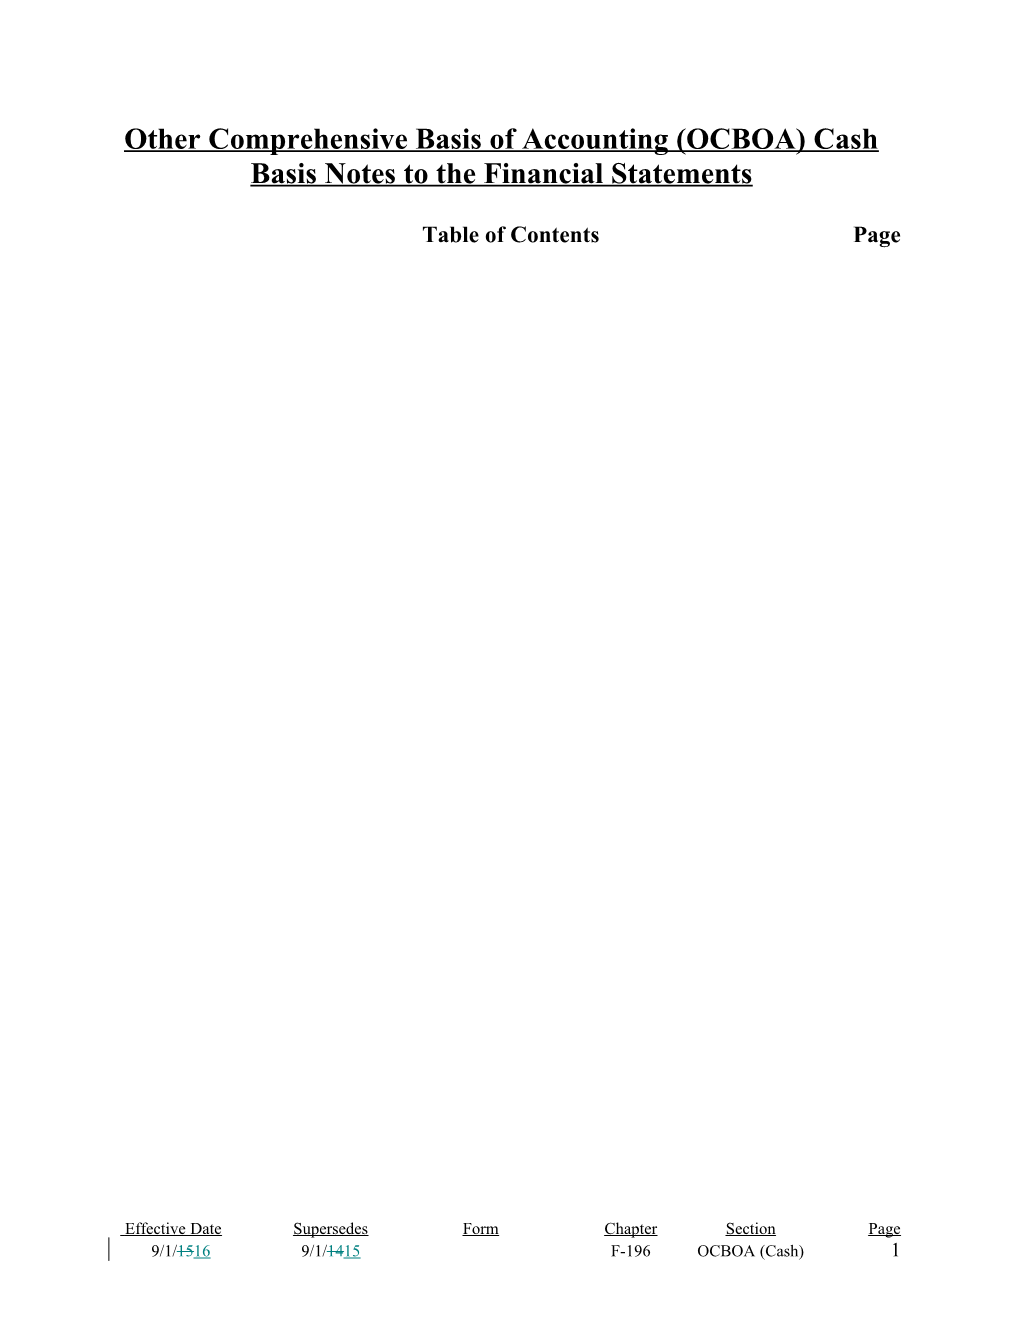 Cash-Basis OCBOA Financial Statement Notes Template